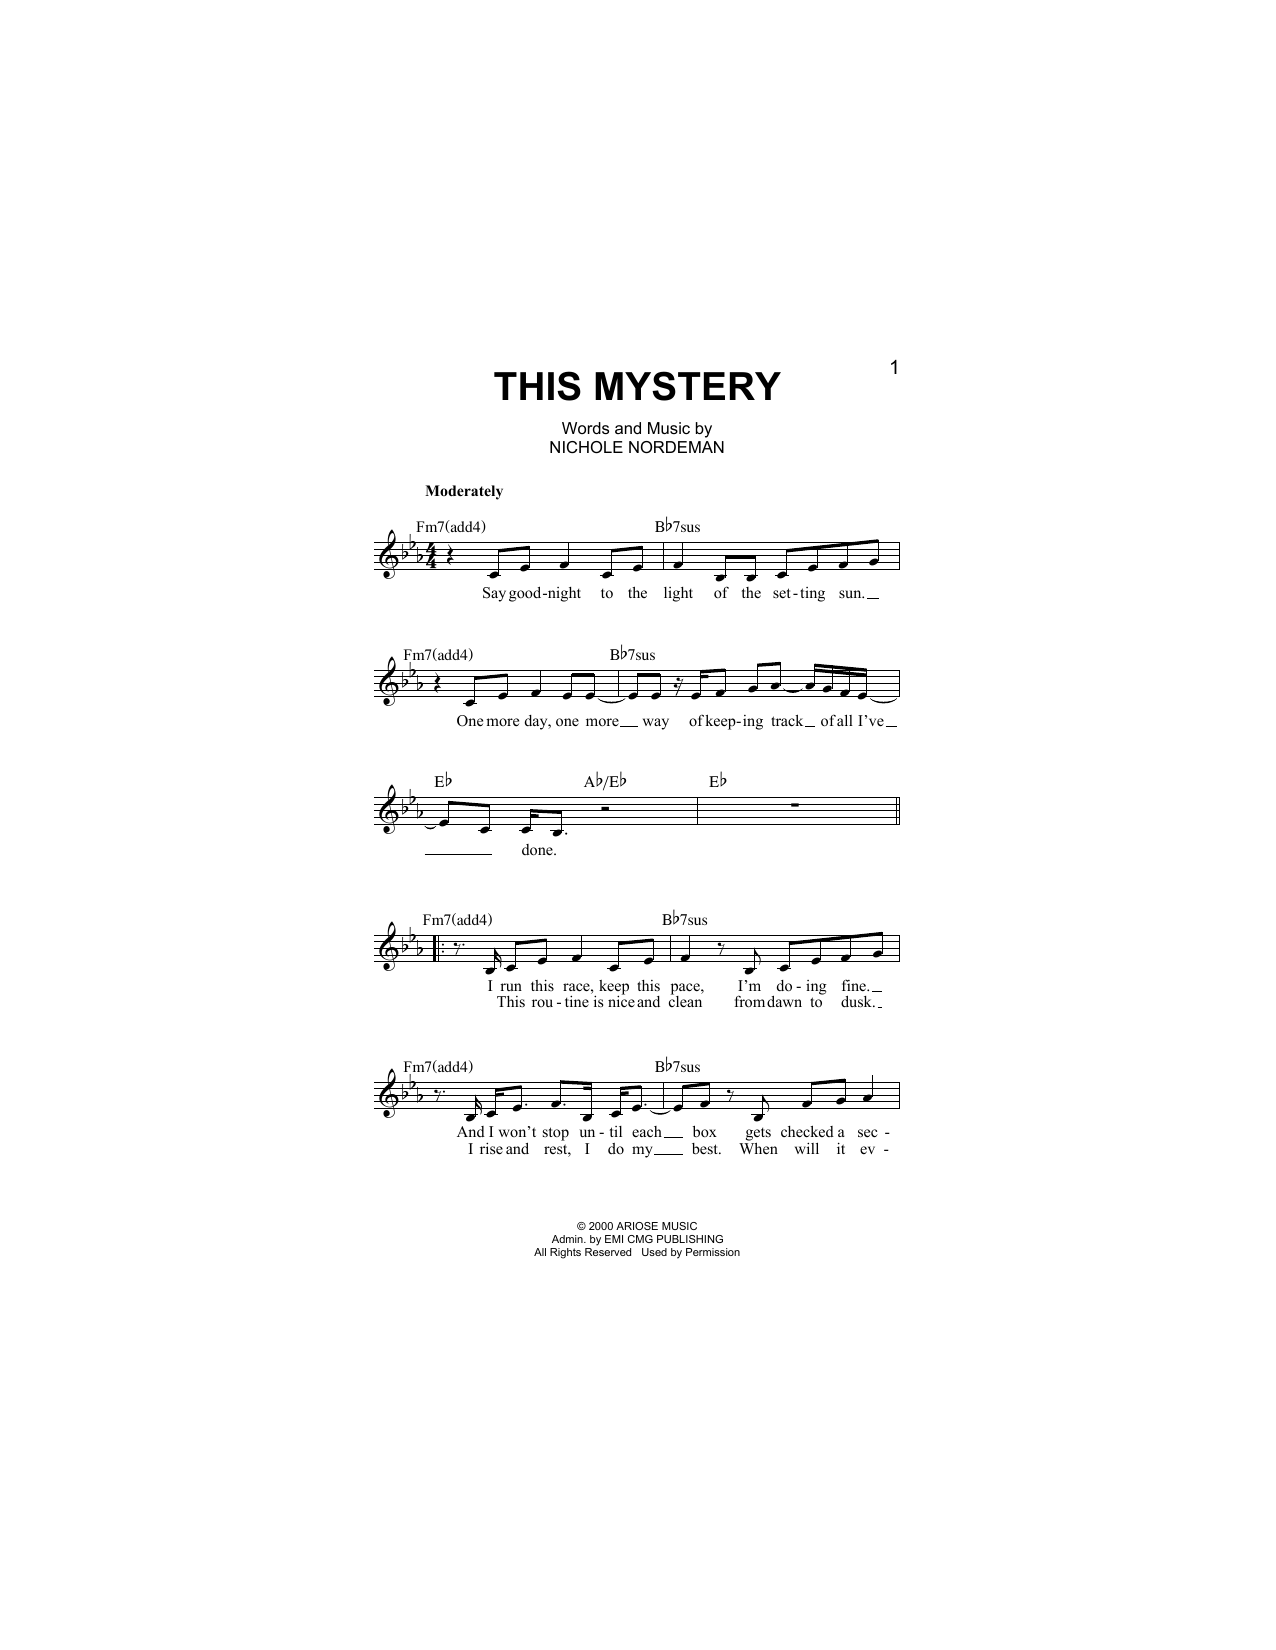 Download Nichole Nordeman This Mystery Sheet Music